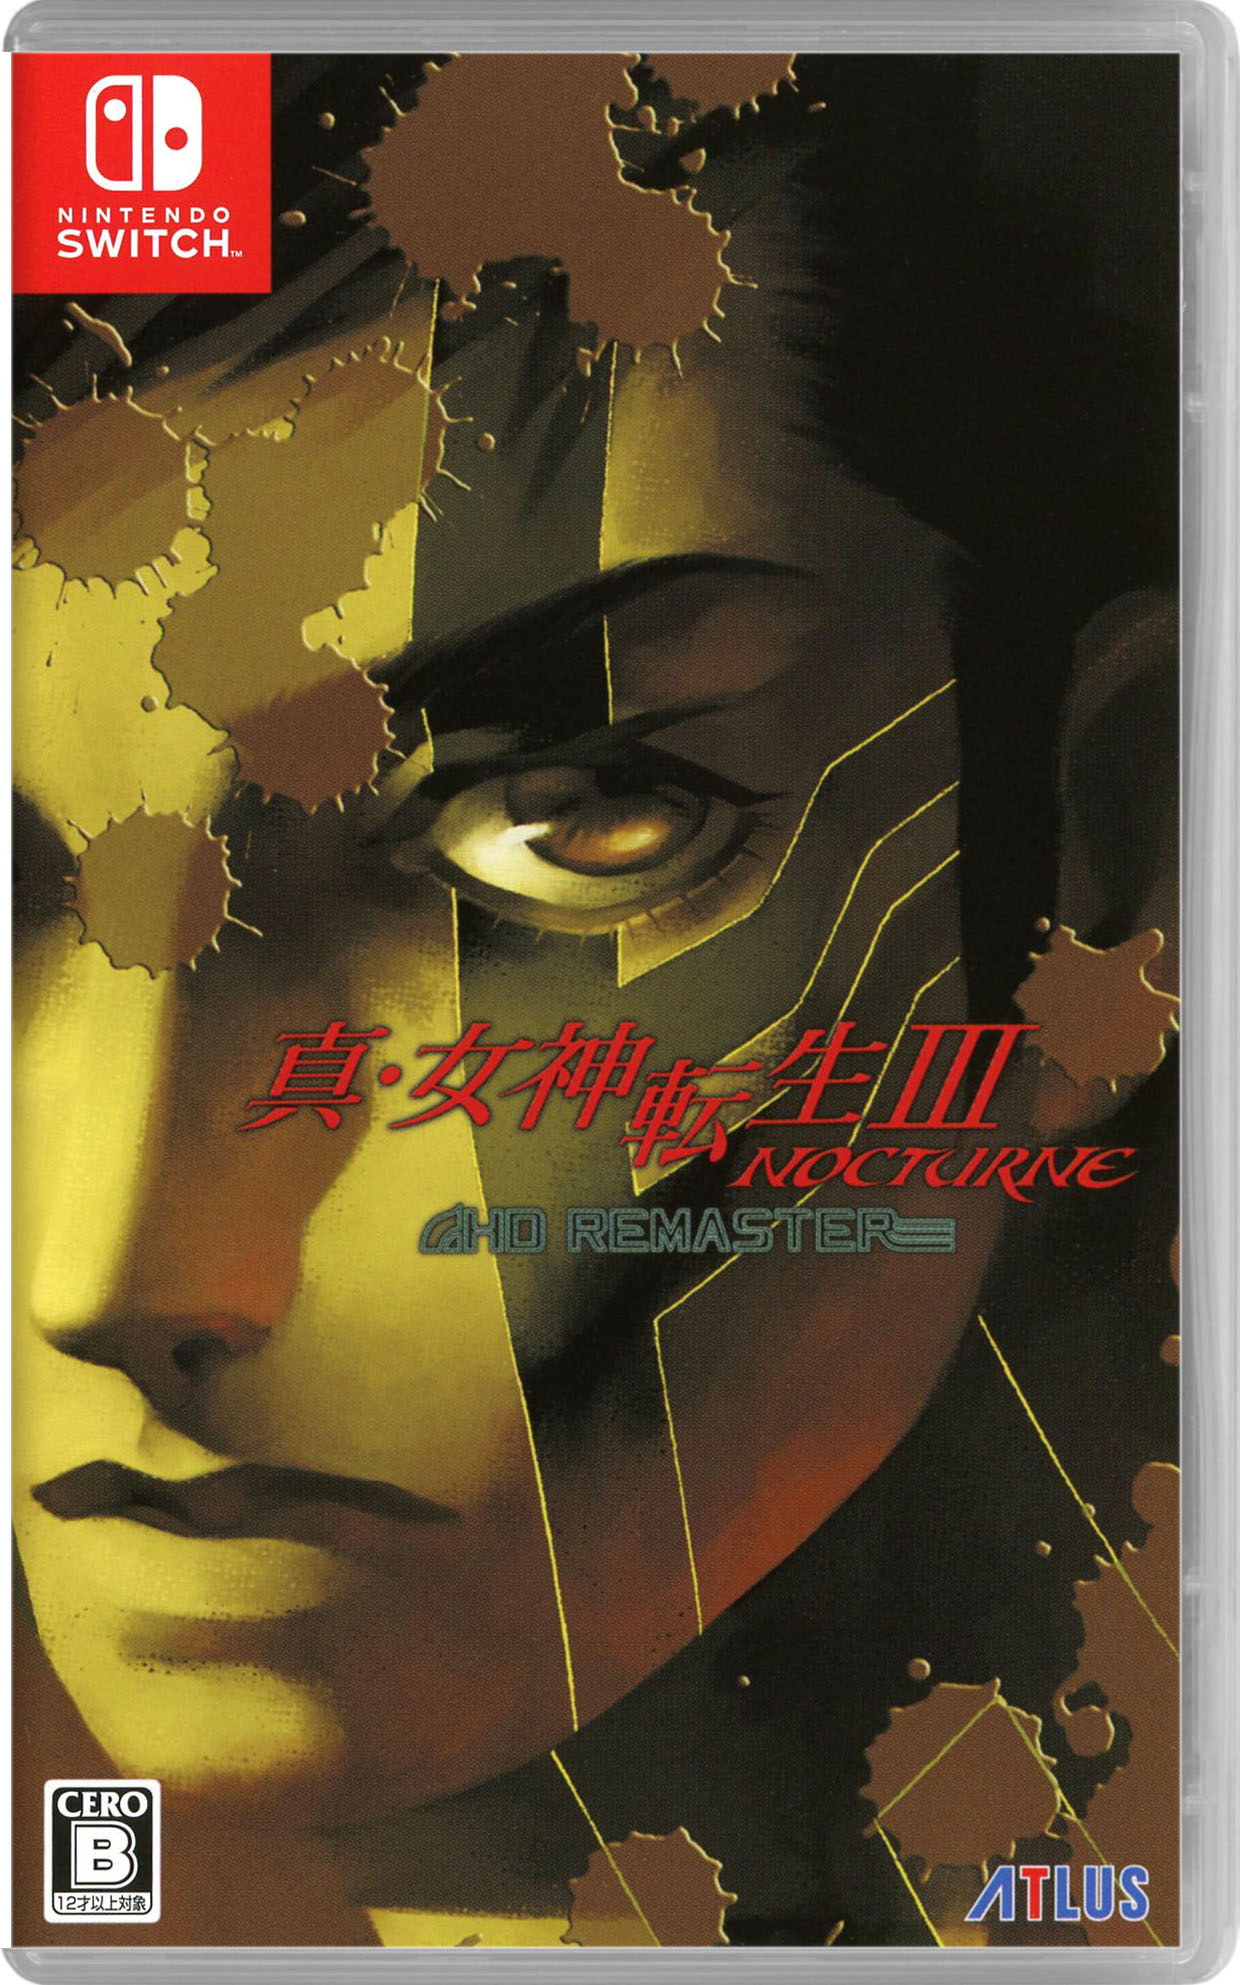 yÁz^E_]III NOCTURNE HD REMASTER\tg:jeh[Switch\tg^[vCOEQ[